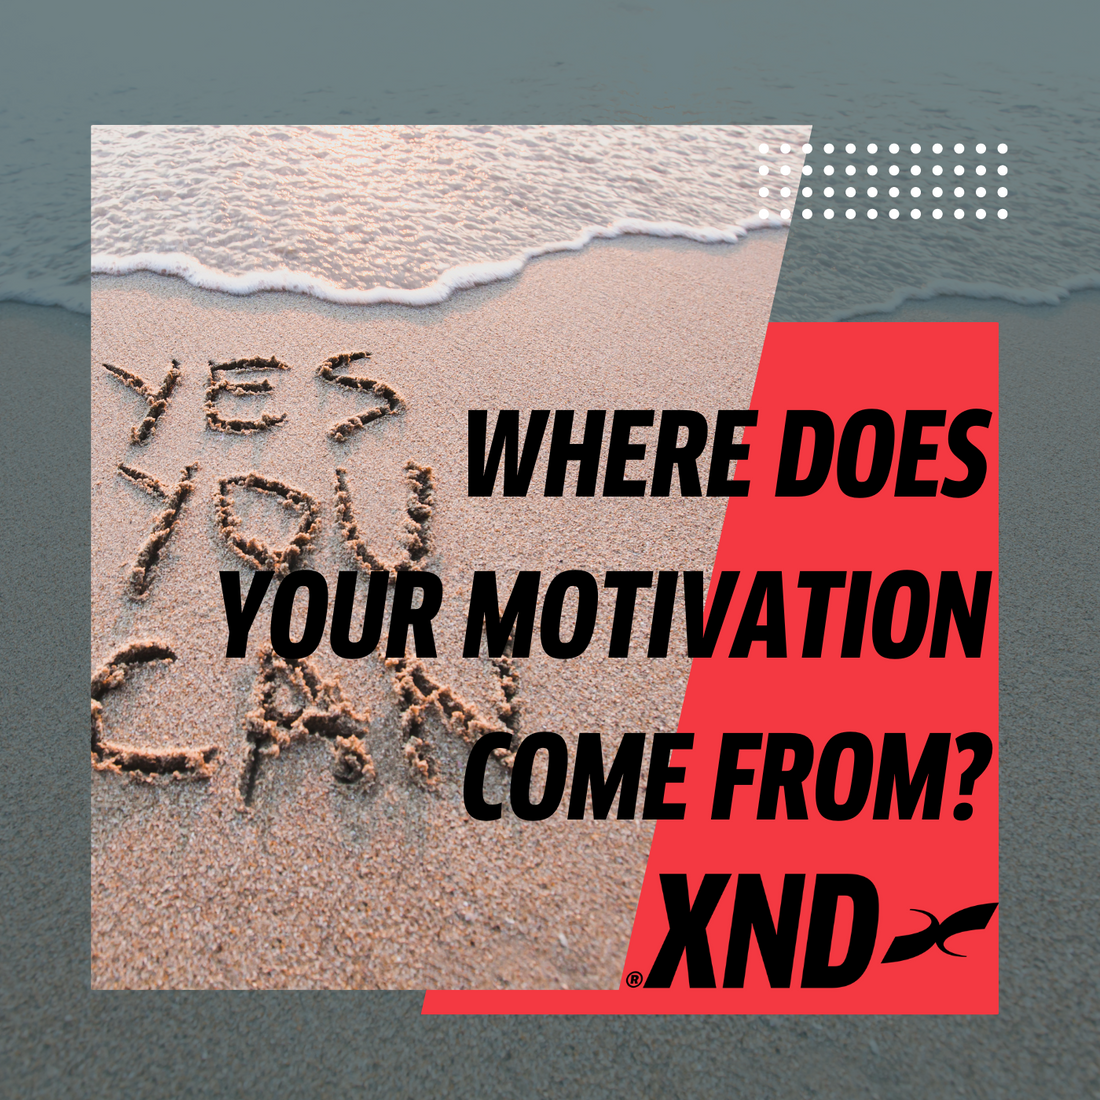 Where does your motivation come from?